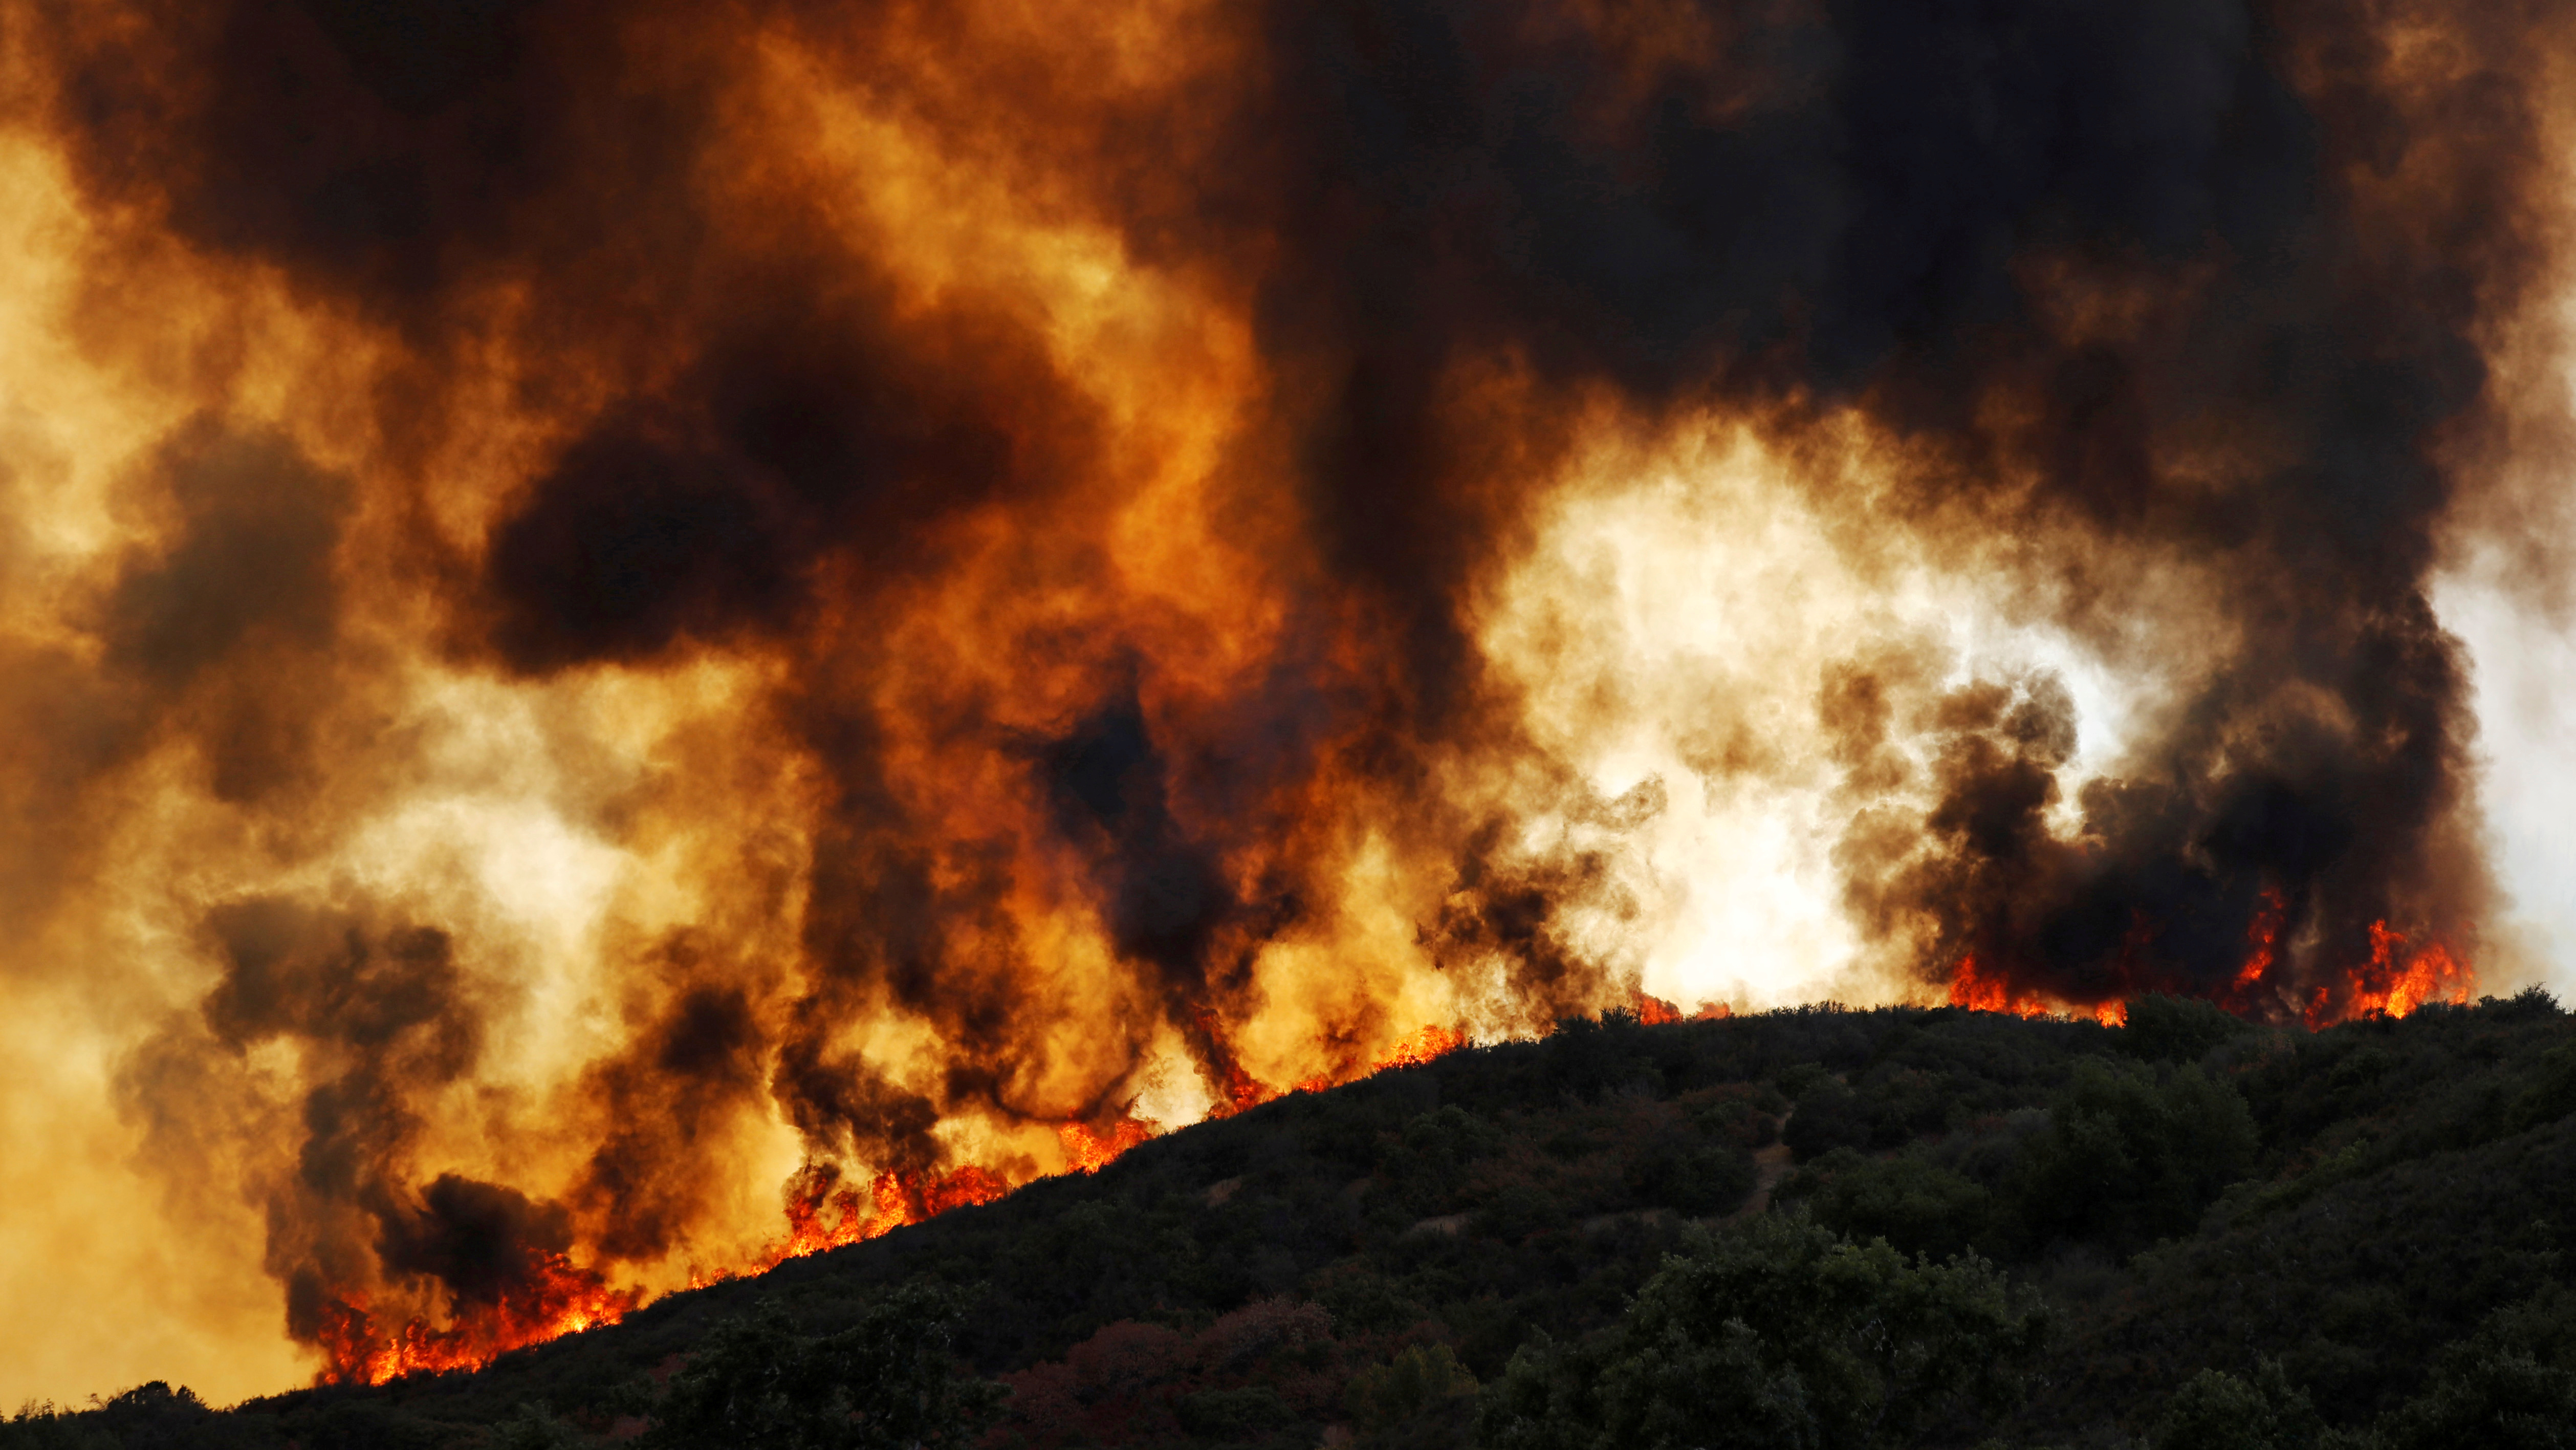 Wind-driven flames roll over a hill towards homes during the River Fire (Mendocino Complex) near Lakeport, California, U.S. August 2, 2018.  REUTERS/Fred Greaves      TPX IMAGES OF THE DAY - RC11C39831D0